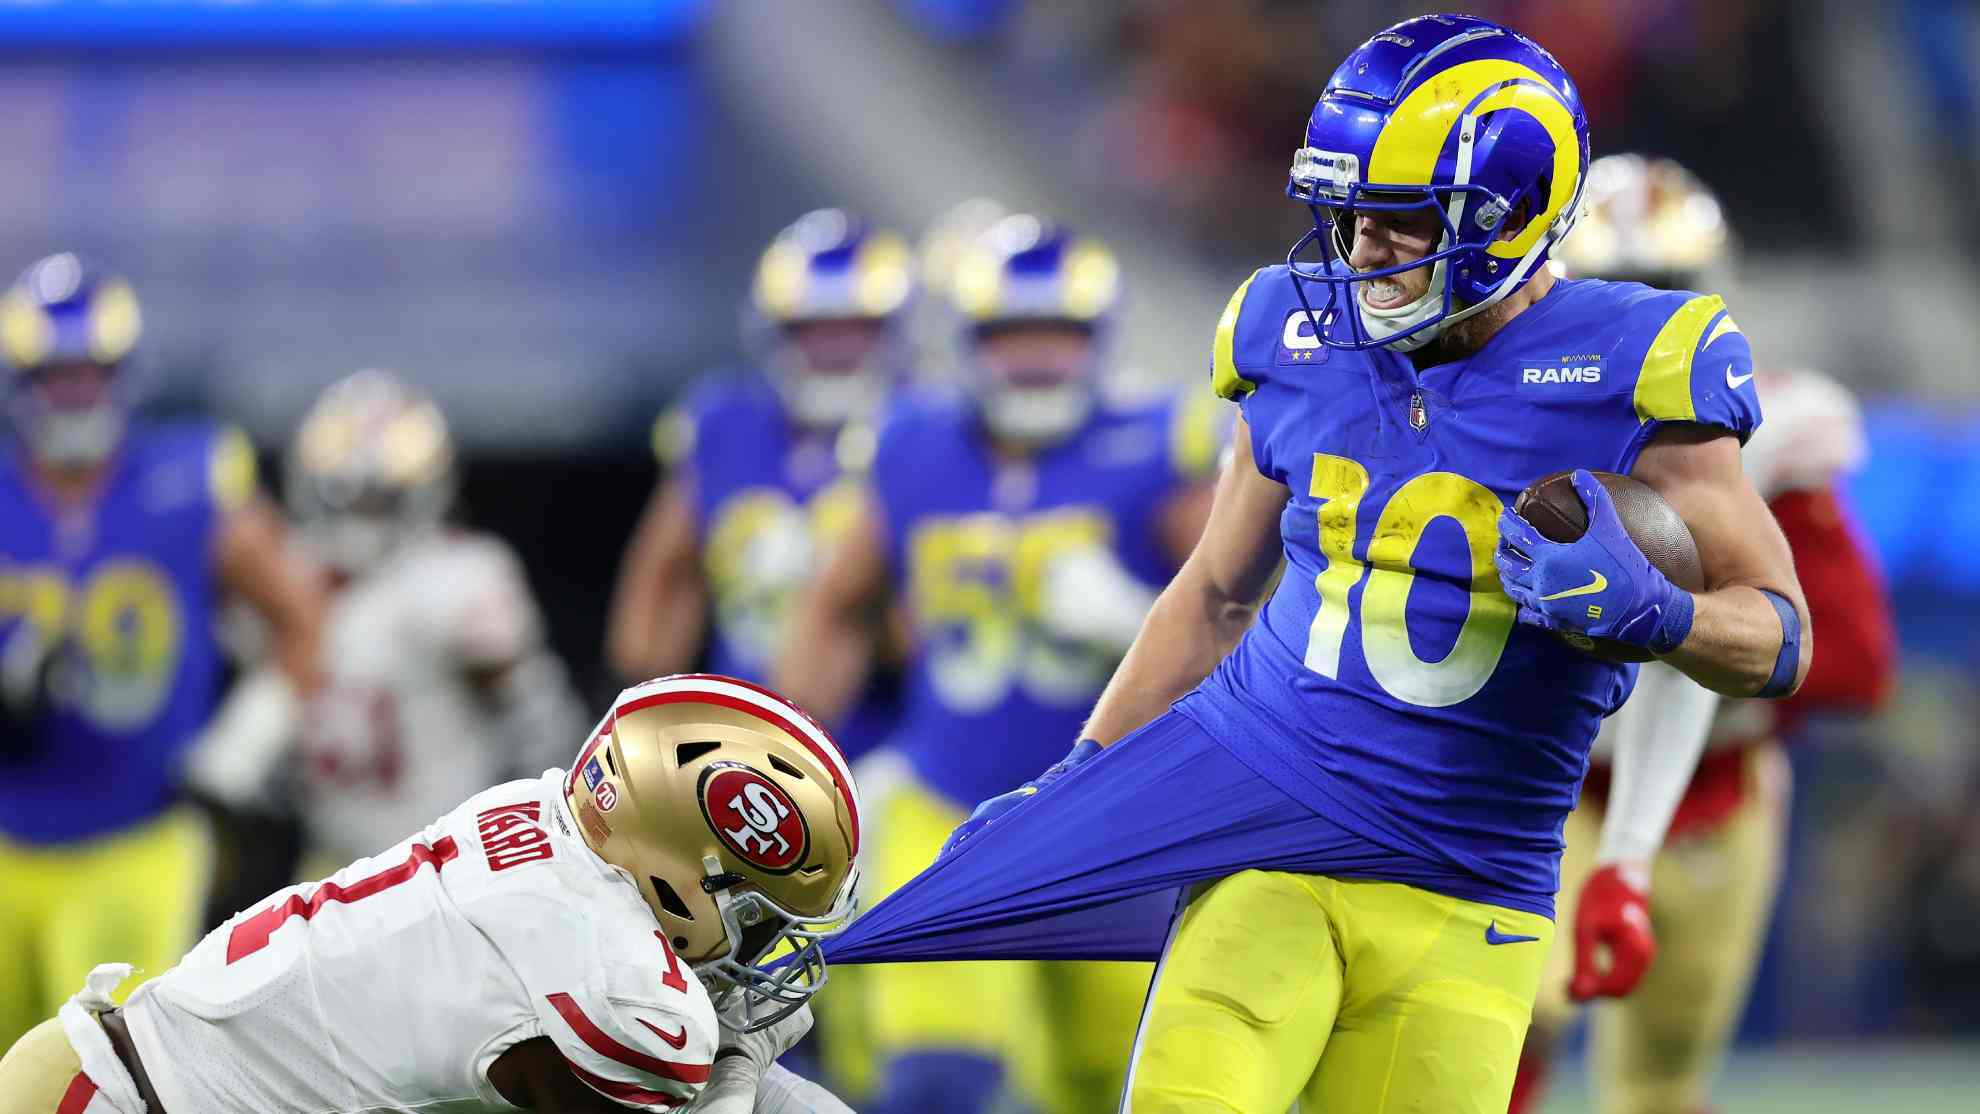 49ers 17-20 Rams: Rams to play Super Bowl LVI at home by beating